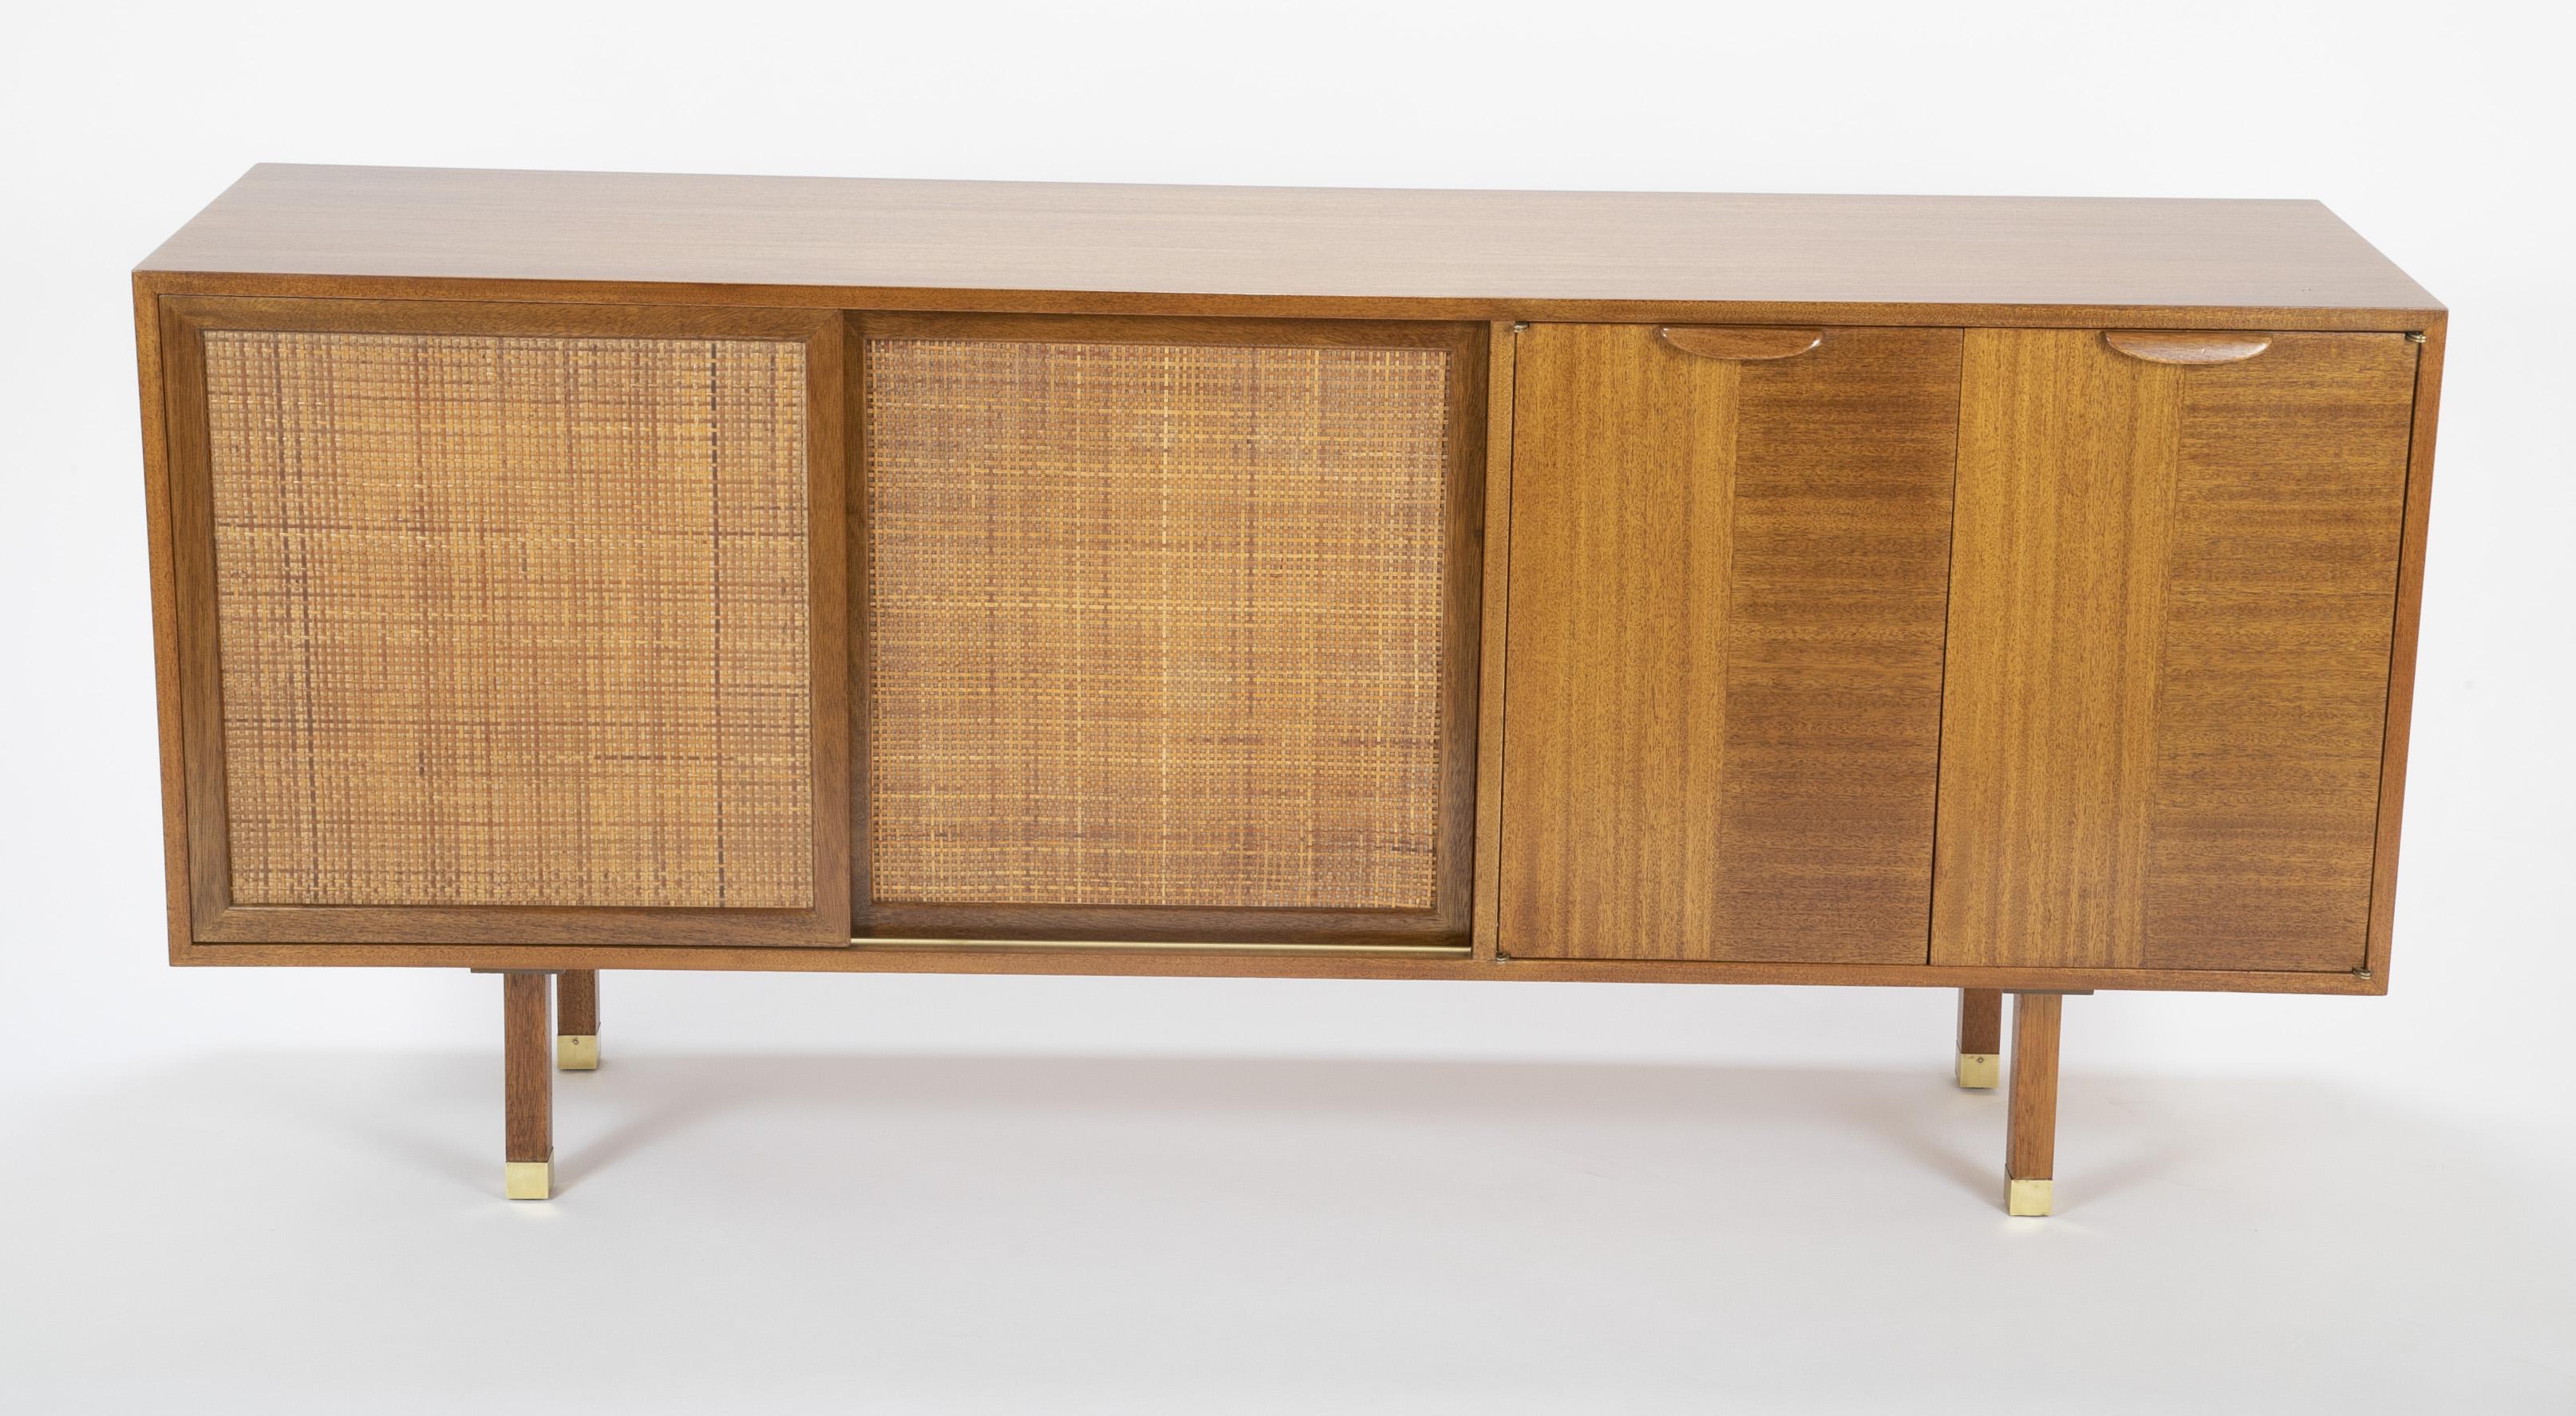 A Harvey Prober credenza formerly a record / stereo cabinet. Produced by Prober Inc. Sapele mahogany case with cane doors and brass caped feet.